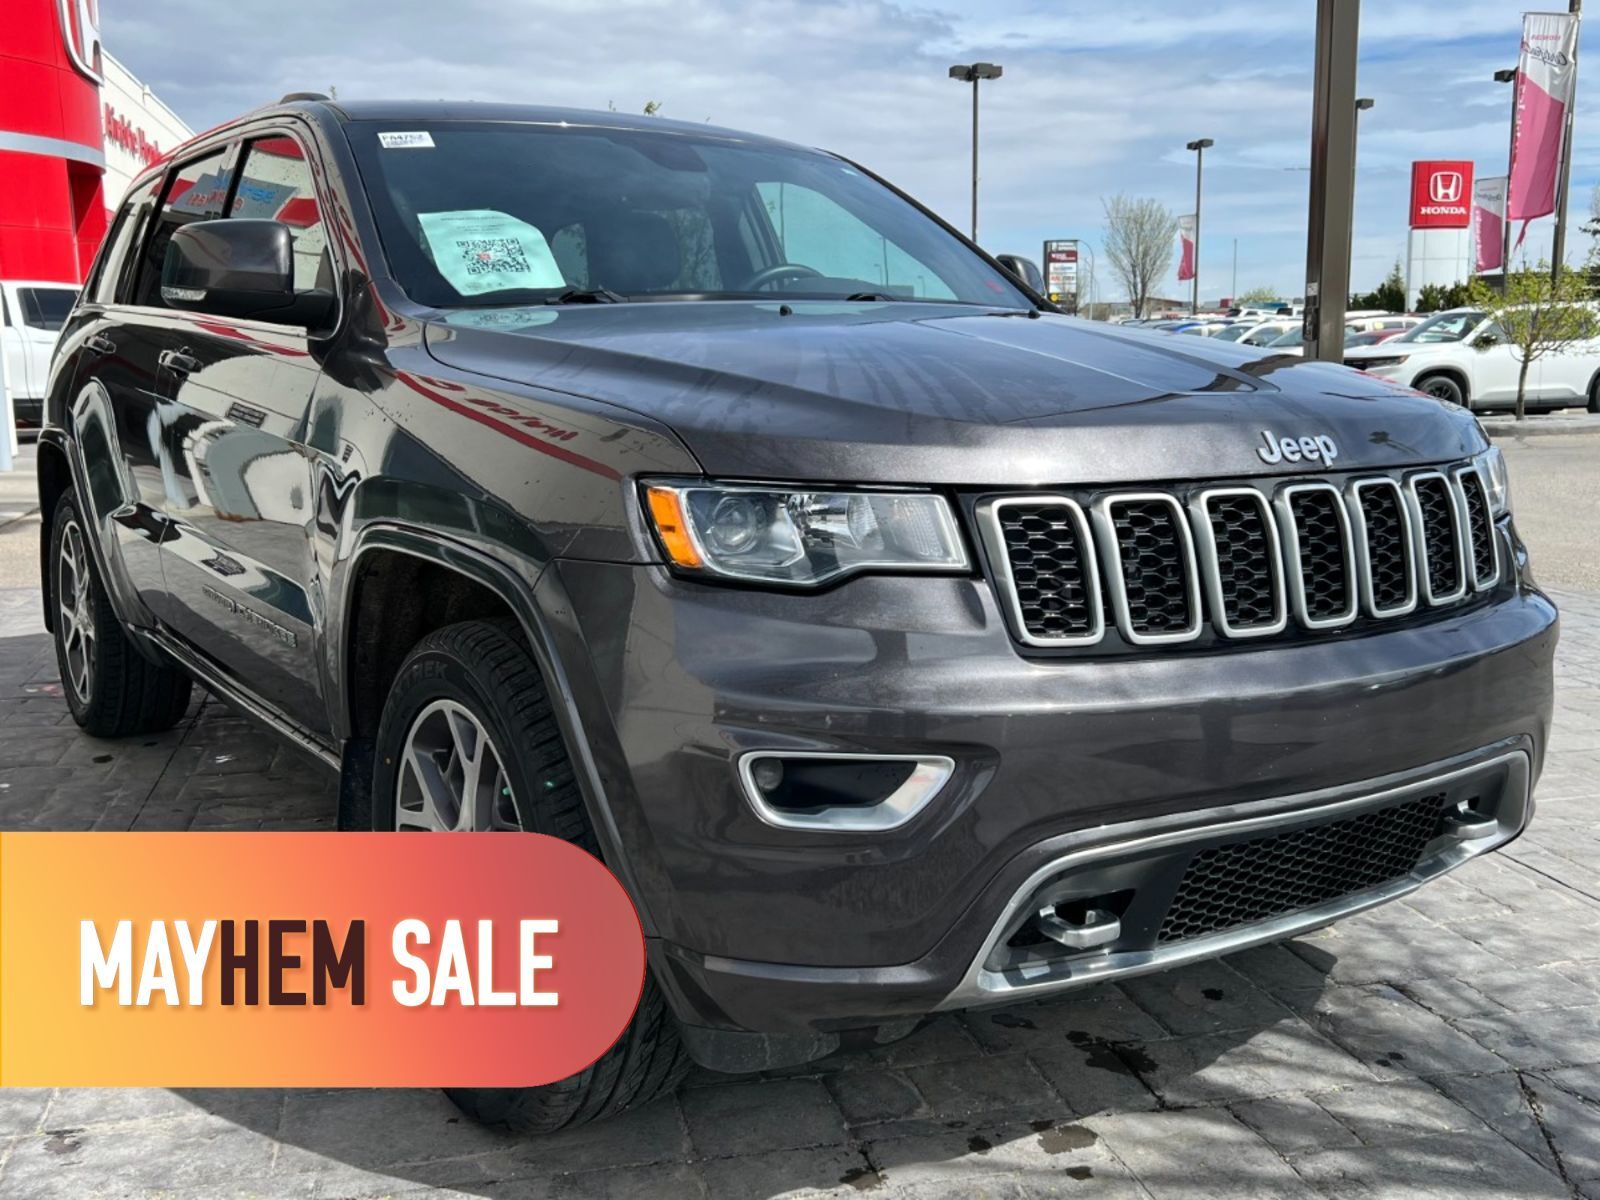 2018 Jeep Grand Cherokee LIMITED STERLING EDITION: NO ACCIDENTS, FACTORY RI